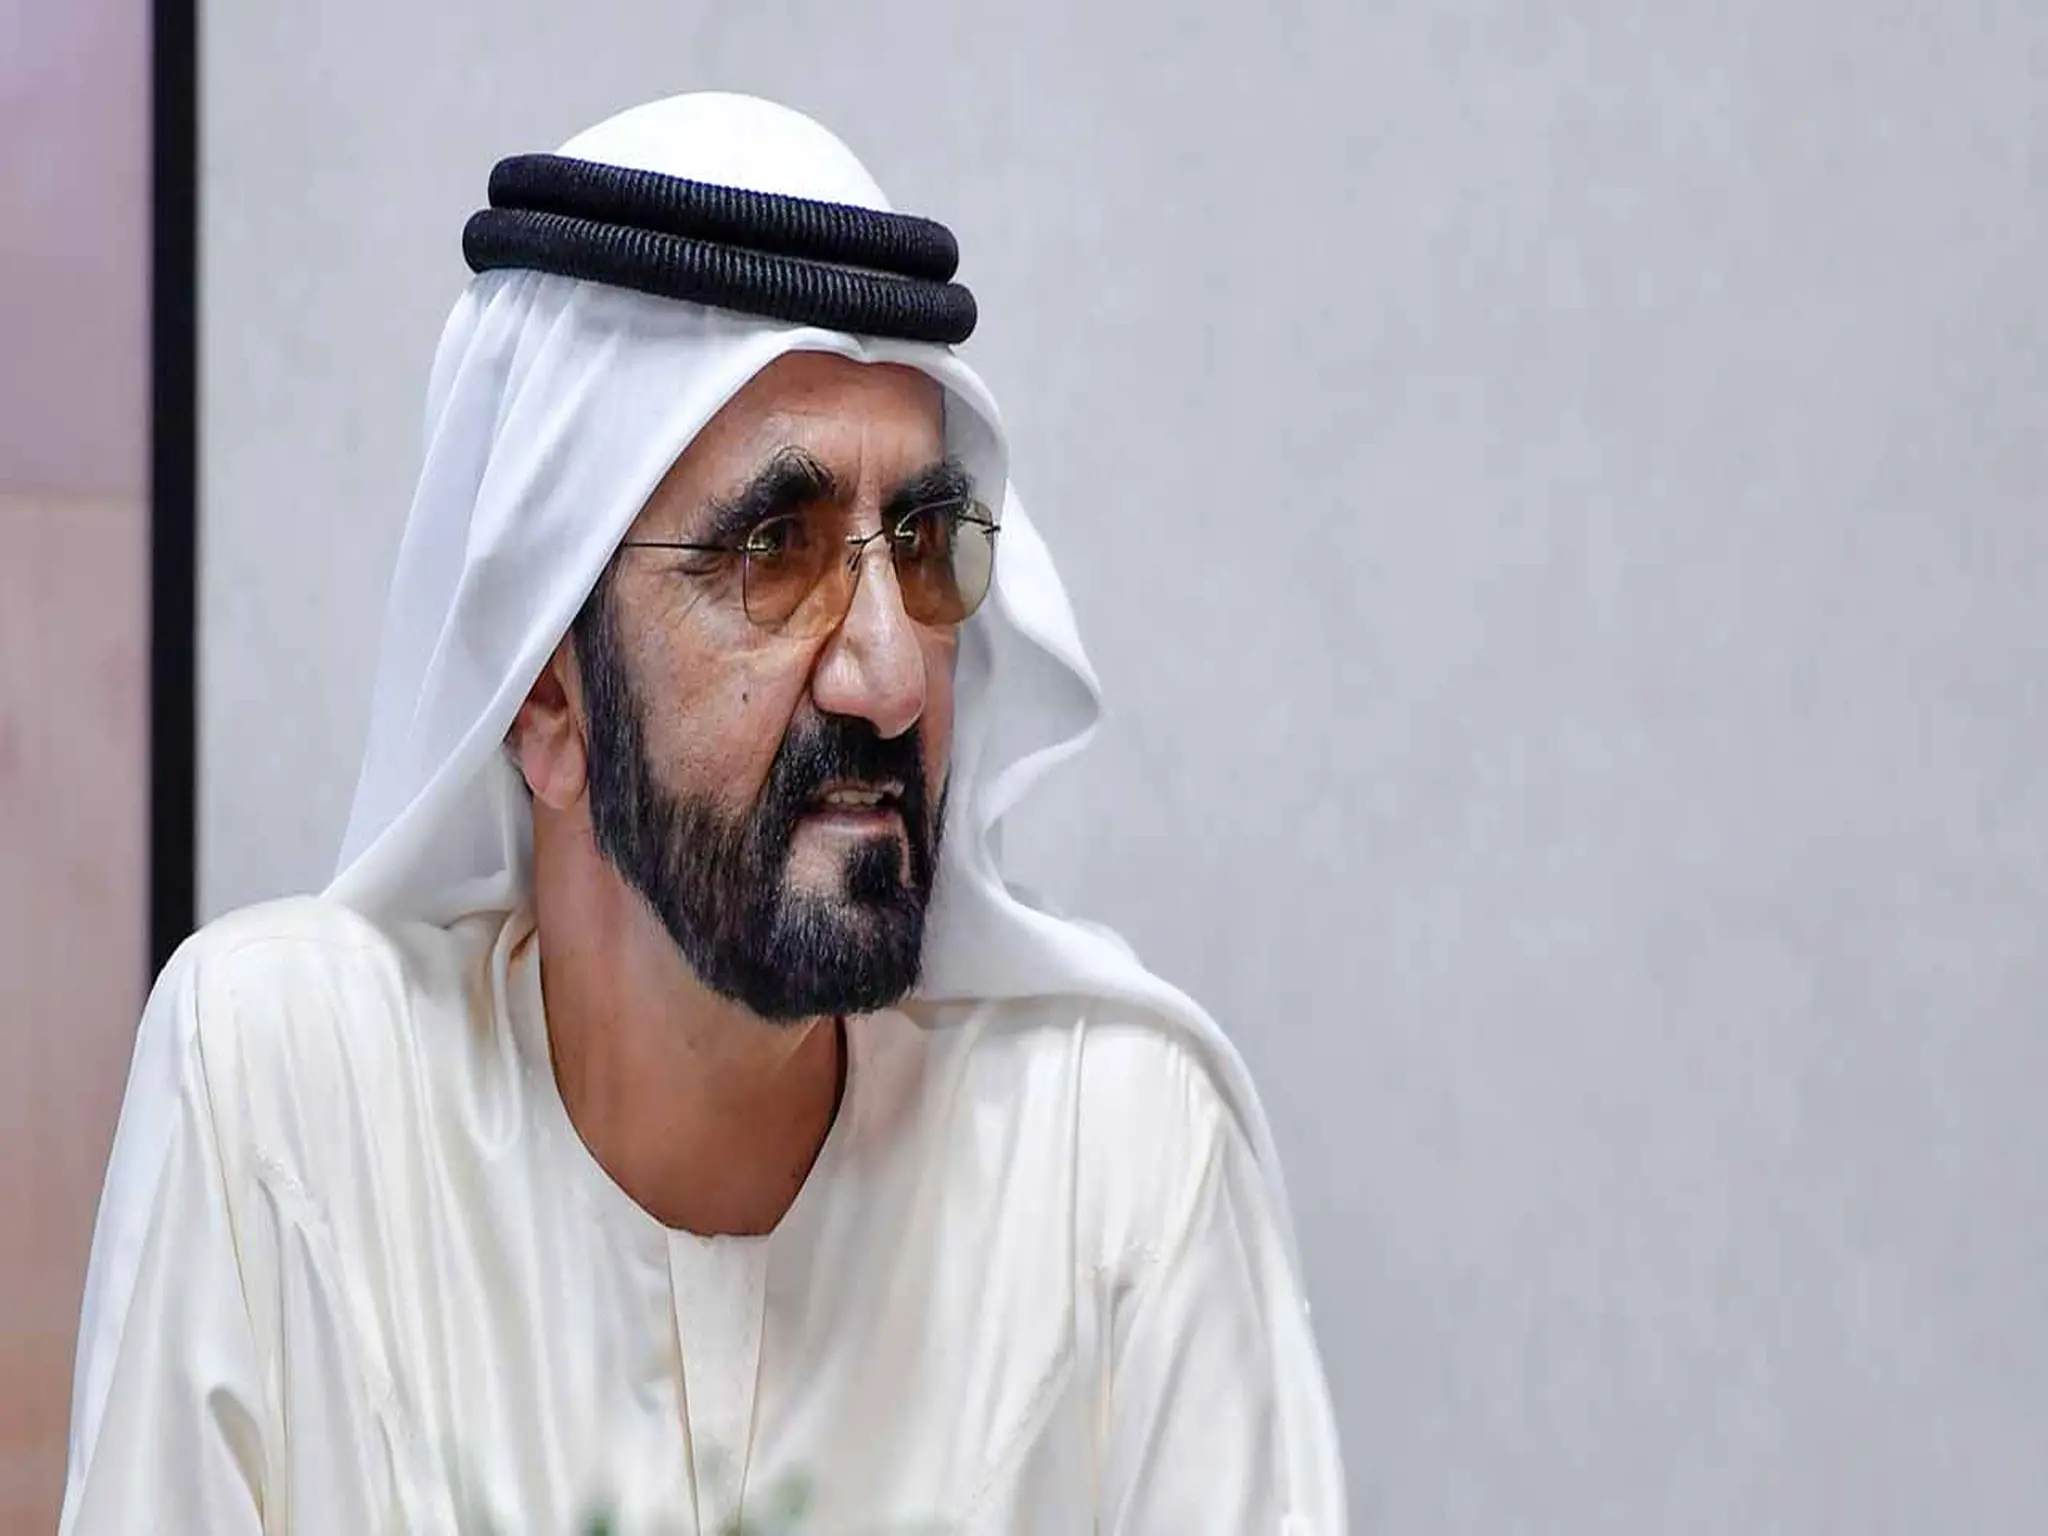 uae officially announces the final end of the 10-day grace period for residents